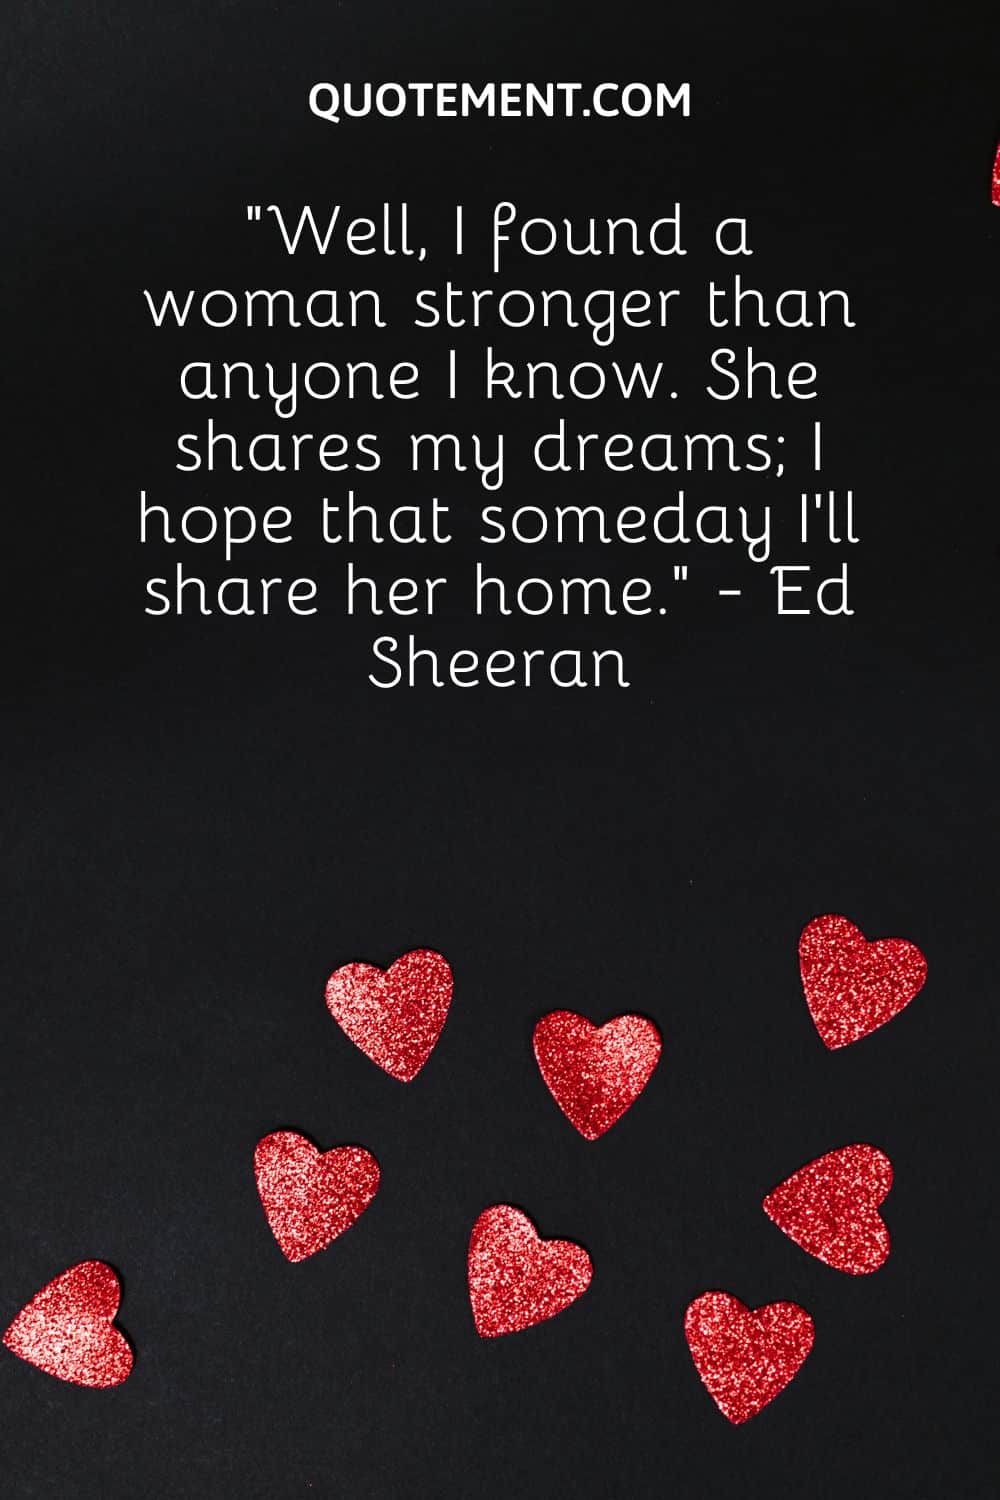 “Well, I found a woman stronger than anyone I know. She shares my dreams; I hope that someday I’ll share her home.” - Ed Sheeran